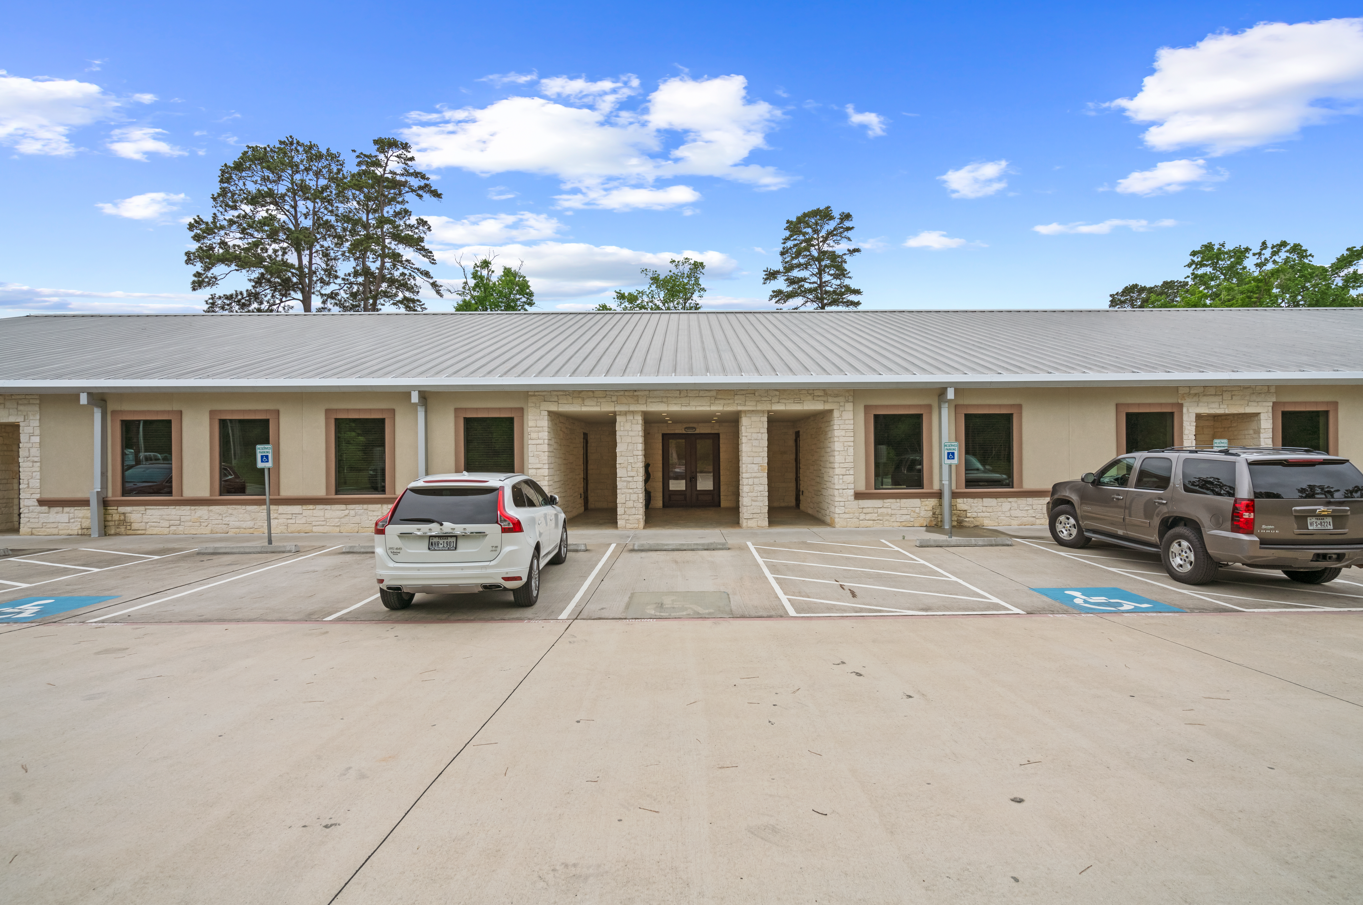 NAI Partners arranges retail lease for Action Behavior Center, LLC at Greenwood Place in Conroe Partners Real Estate